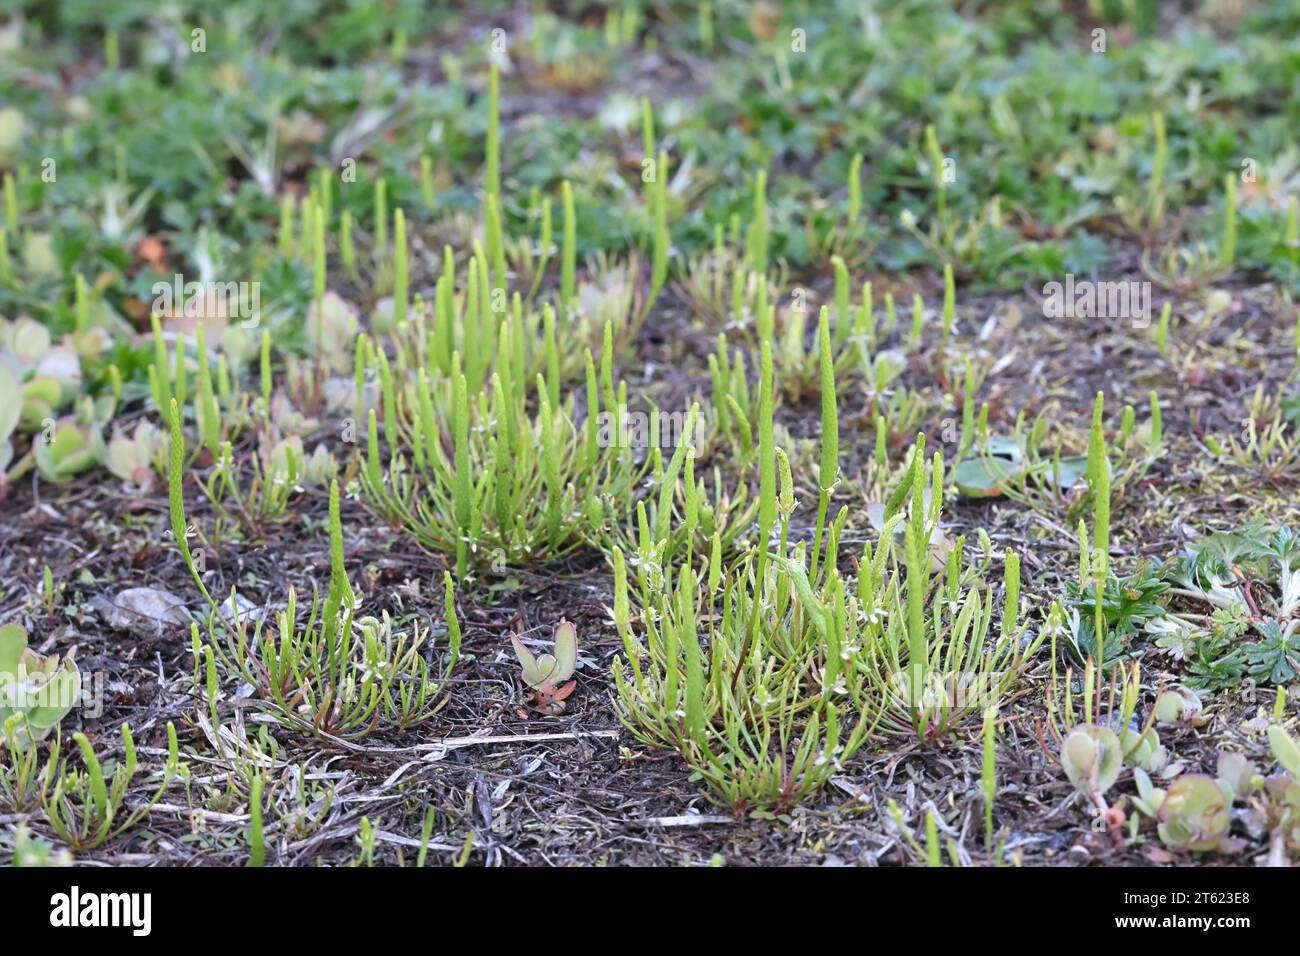 Myosurus minimus, commonly known as tiny mousetail, wild plant from Finland Stock Photo